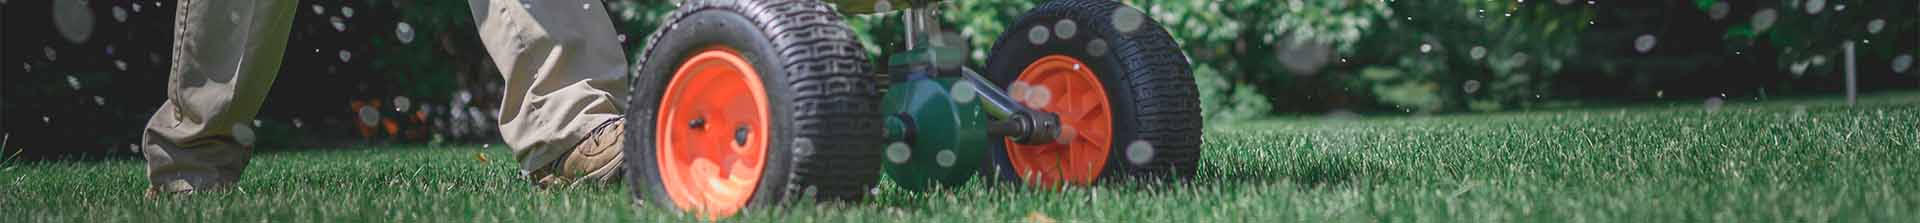 Lawn Tools on Grass